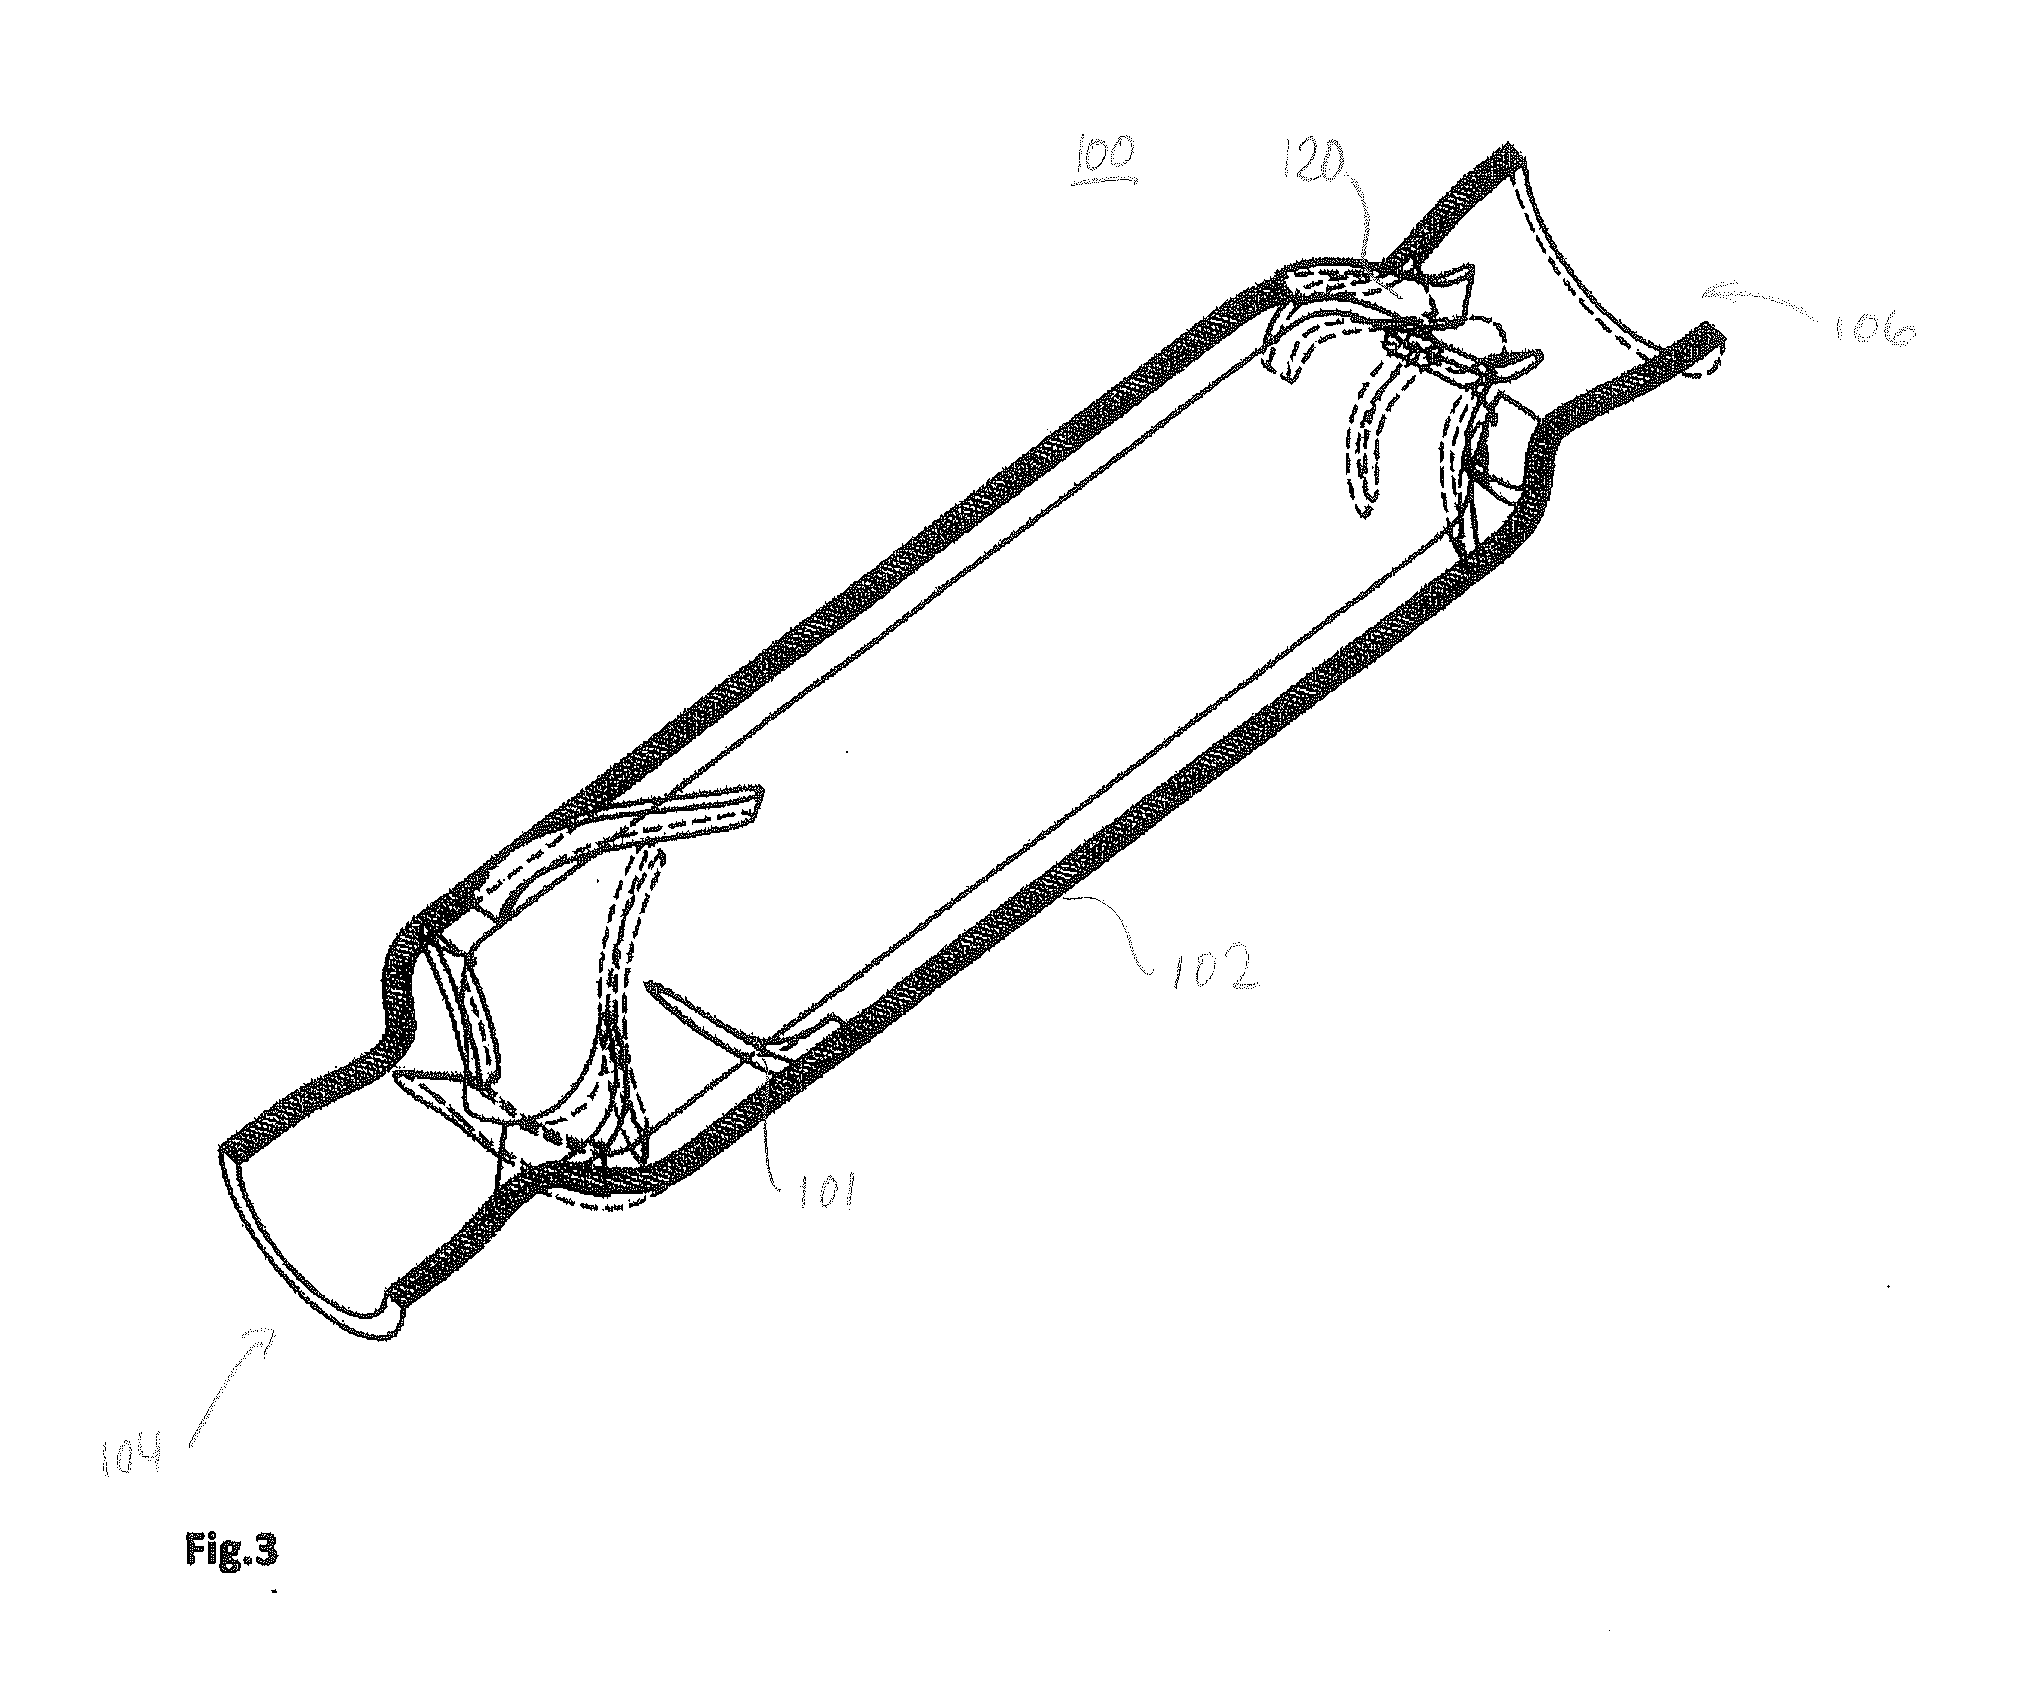 Blood pump with separate mixed-flow and axial-flow impeller stages and multi-stage stators